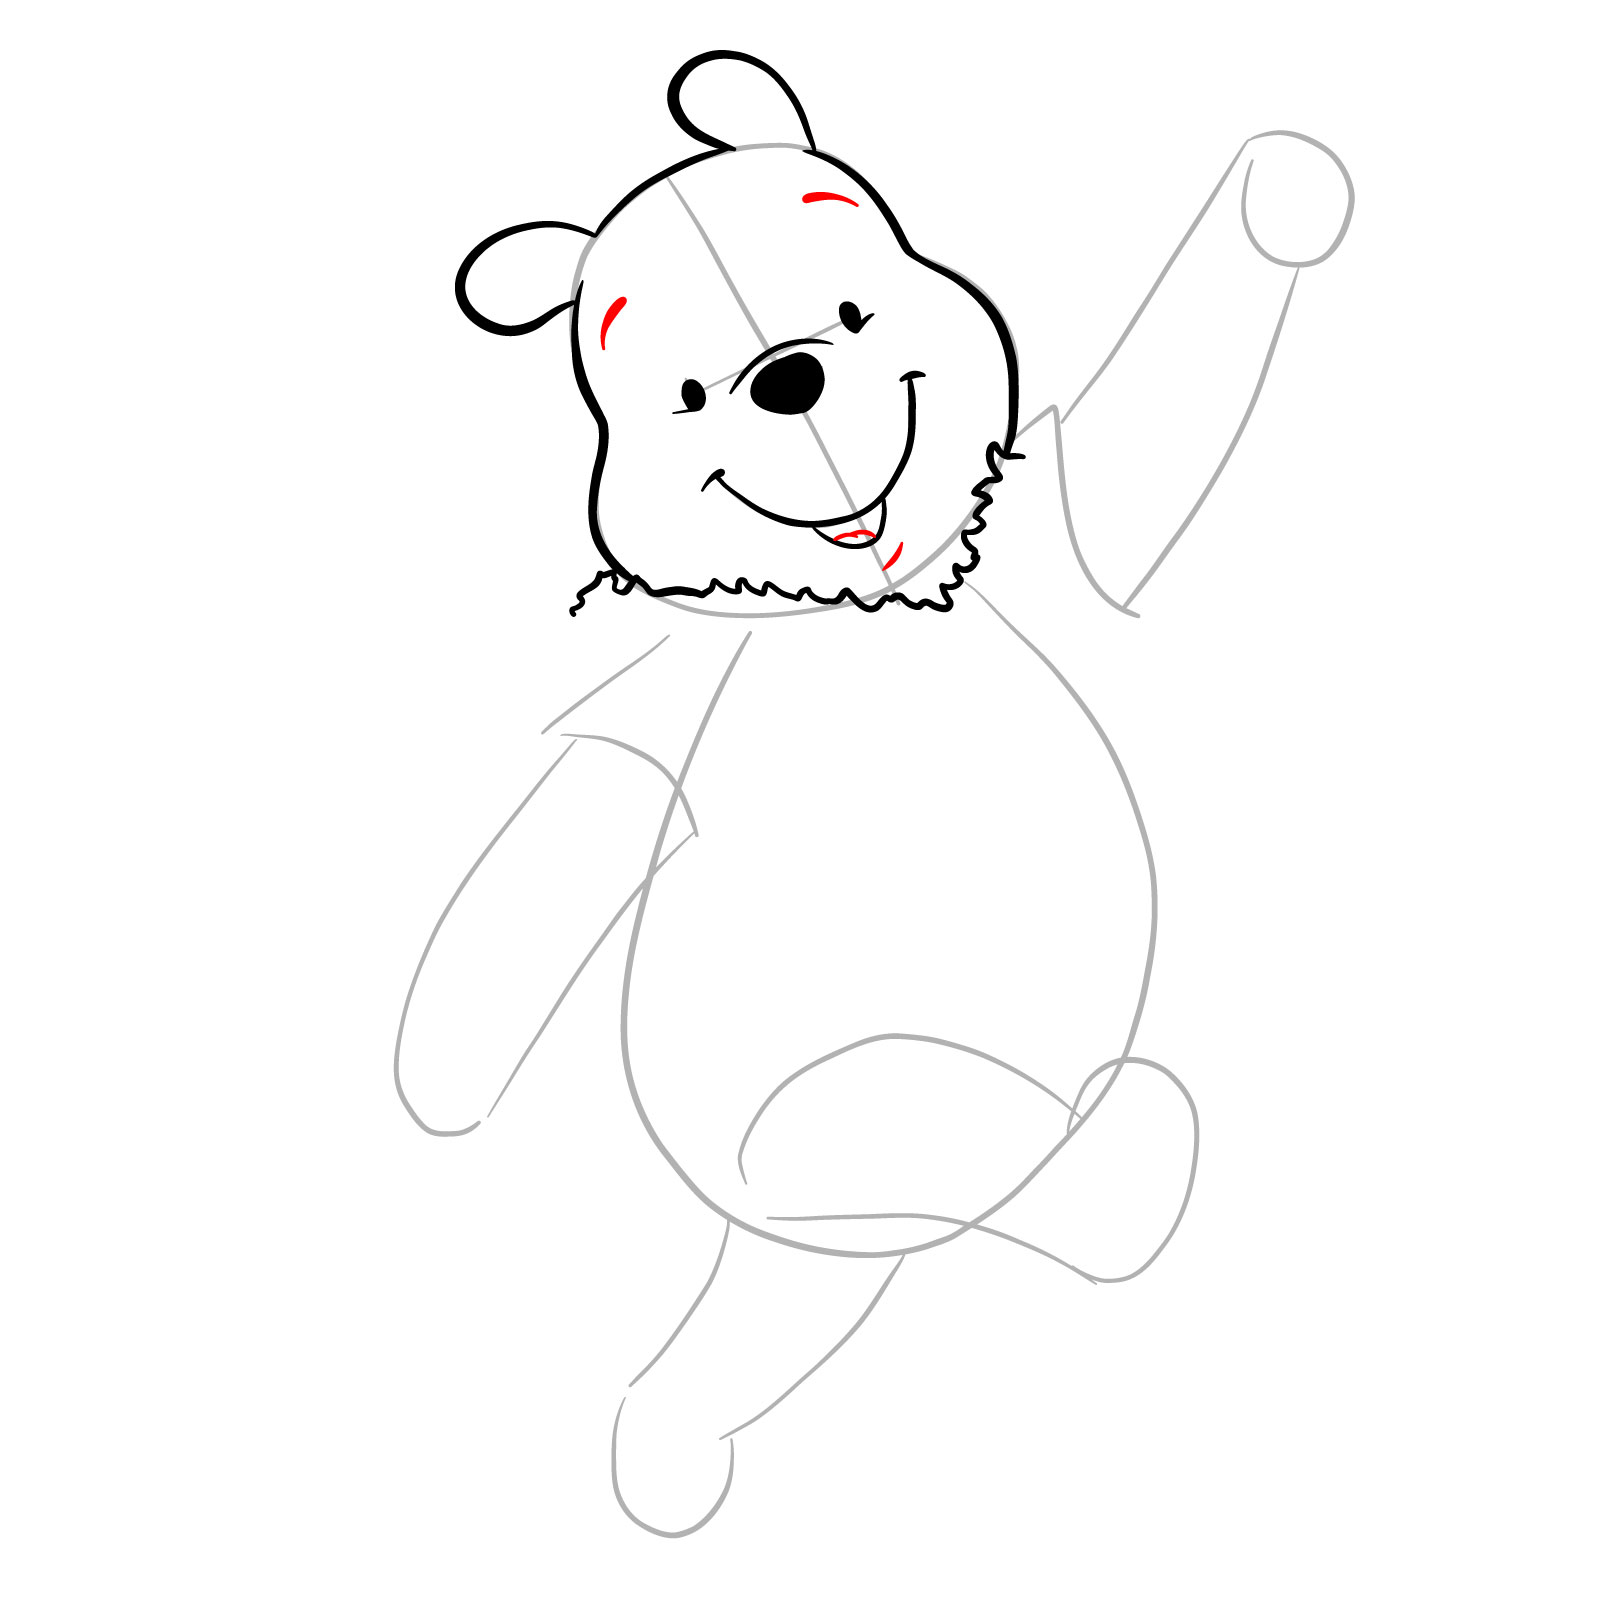 How to draw Winnie-the-Pooh Christmas style - step 10